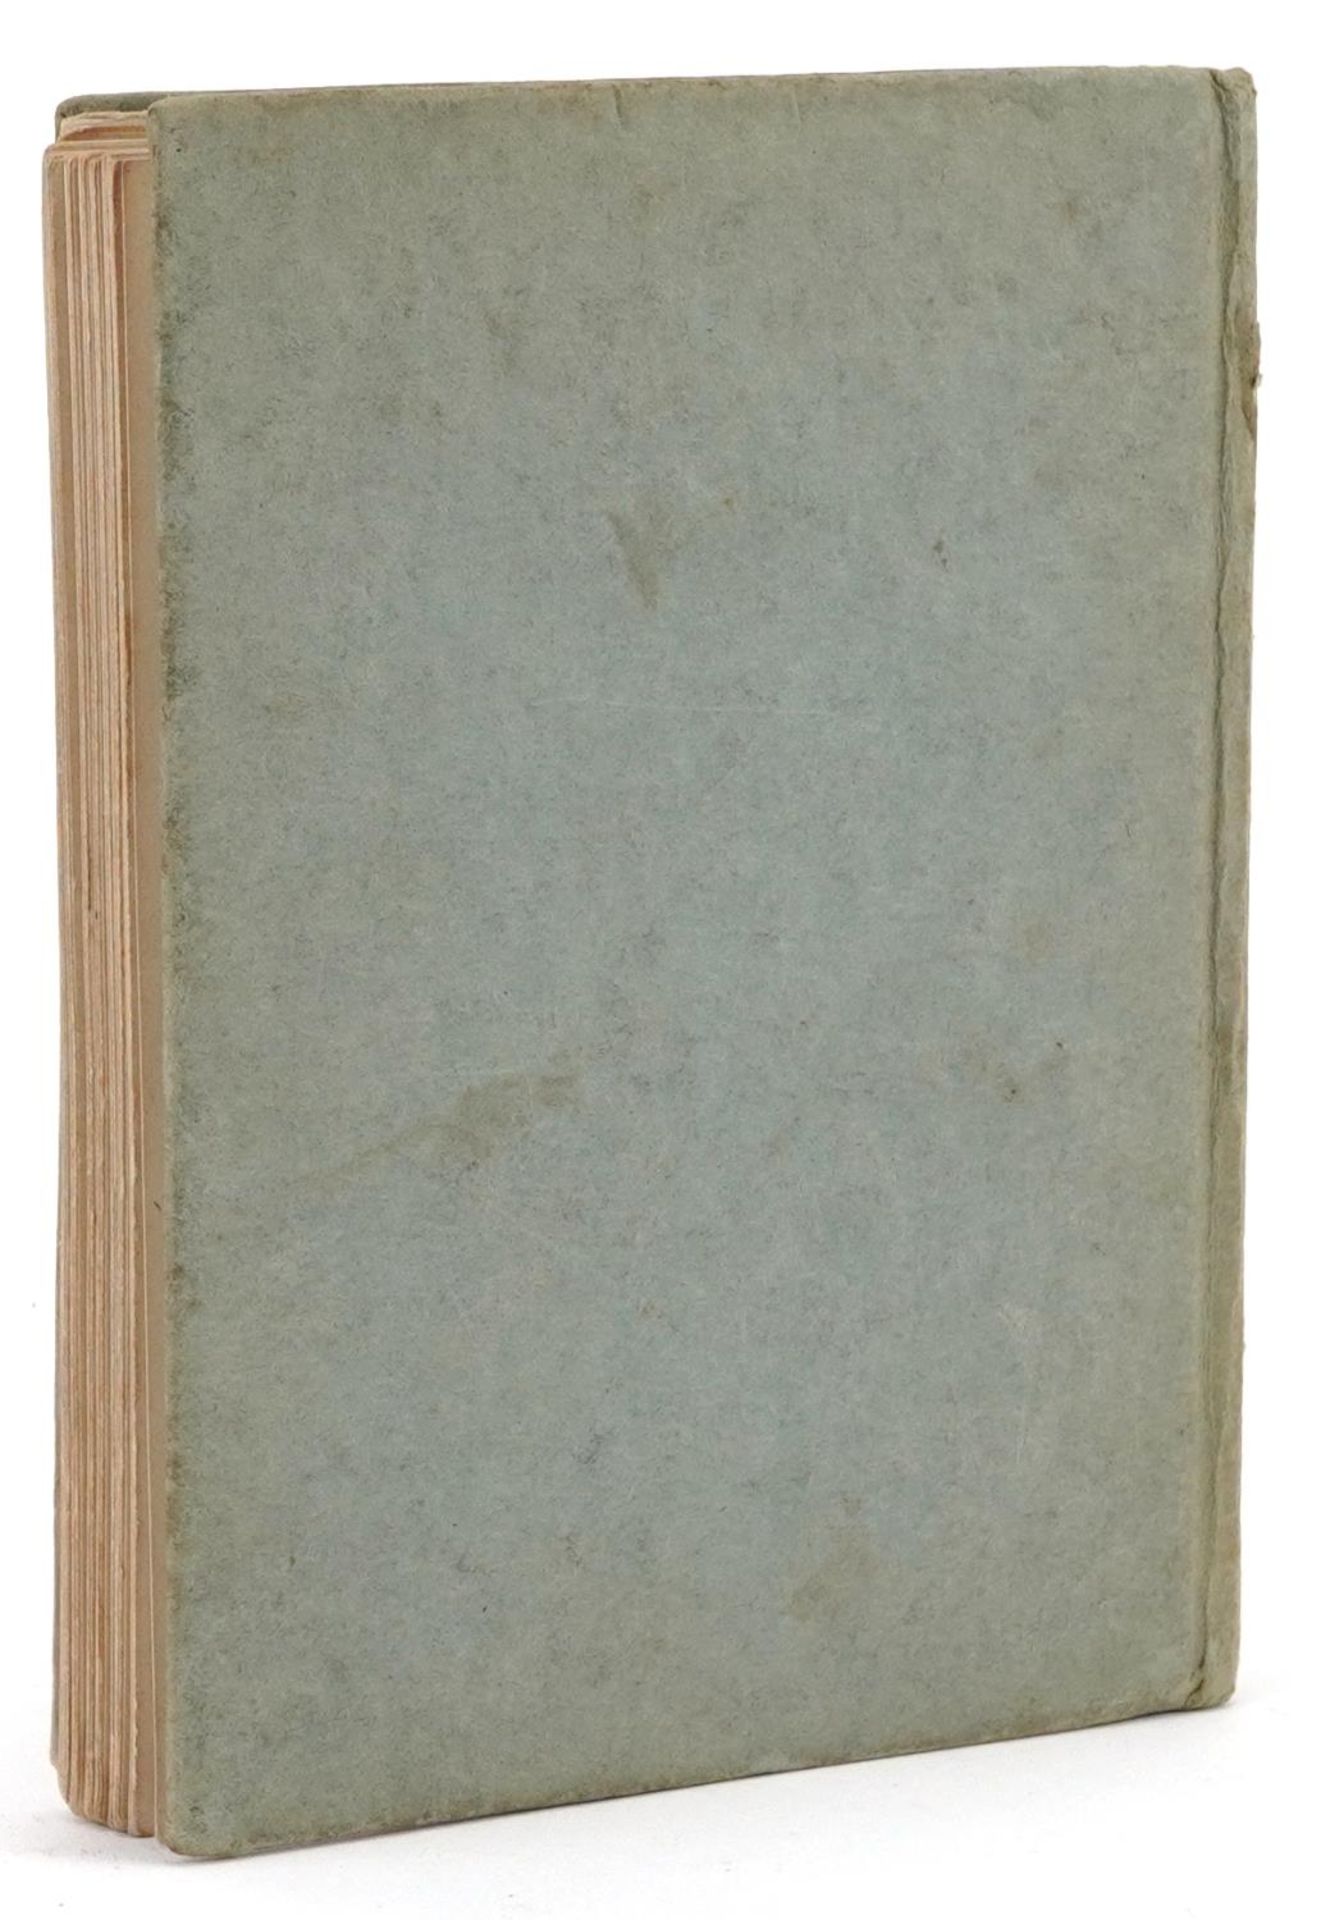 The Tale of Pigling Bland, hardback book by Beatrix Potter published London Frederick Warne & Co, - Image 4 of 4